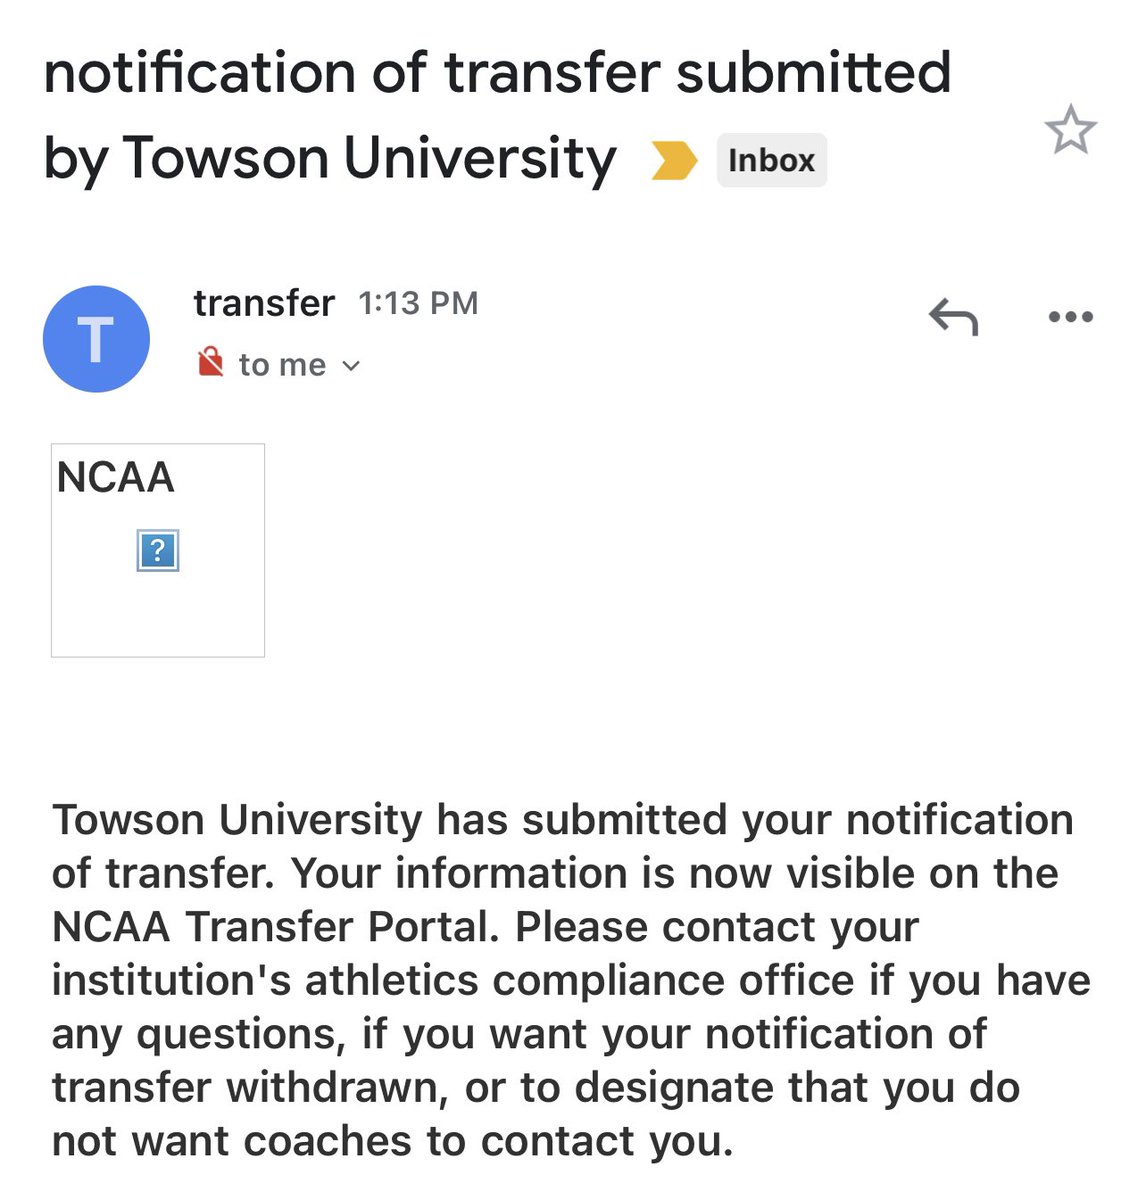 I would like thank my Coaches and support at Towson University for helping me develop as a player and person. With that being said I have decided to enter the transfer portal with 3 years of eligibility remaining.